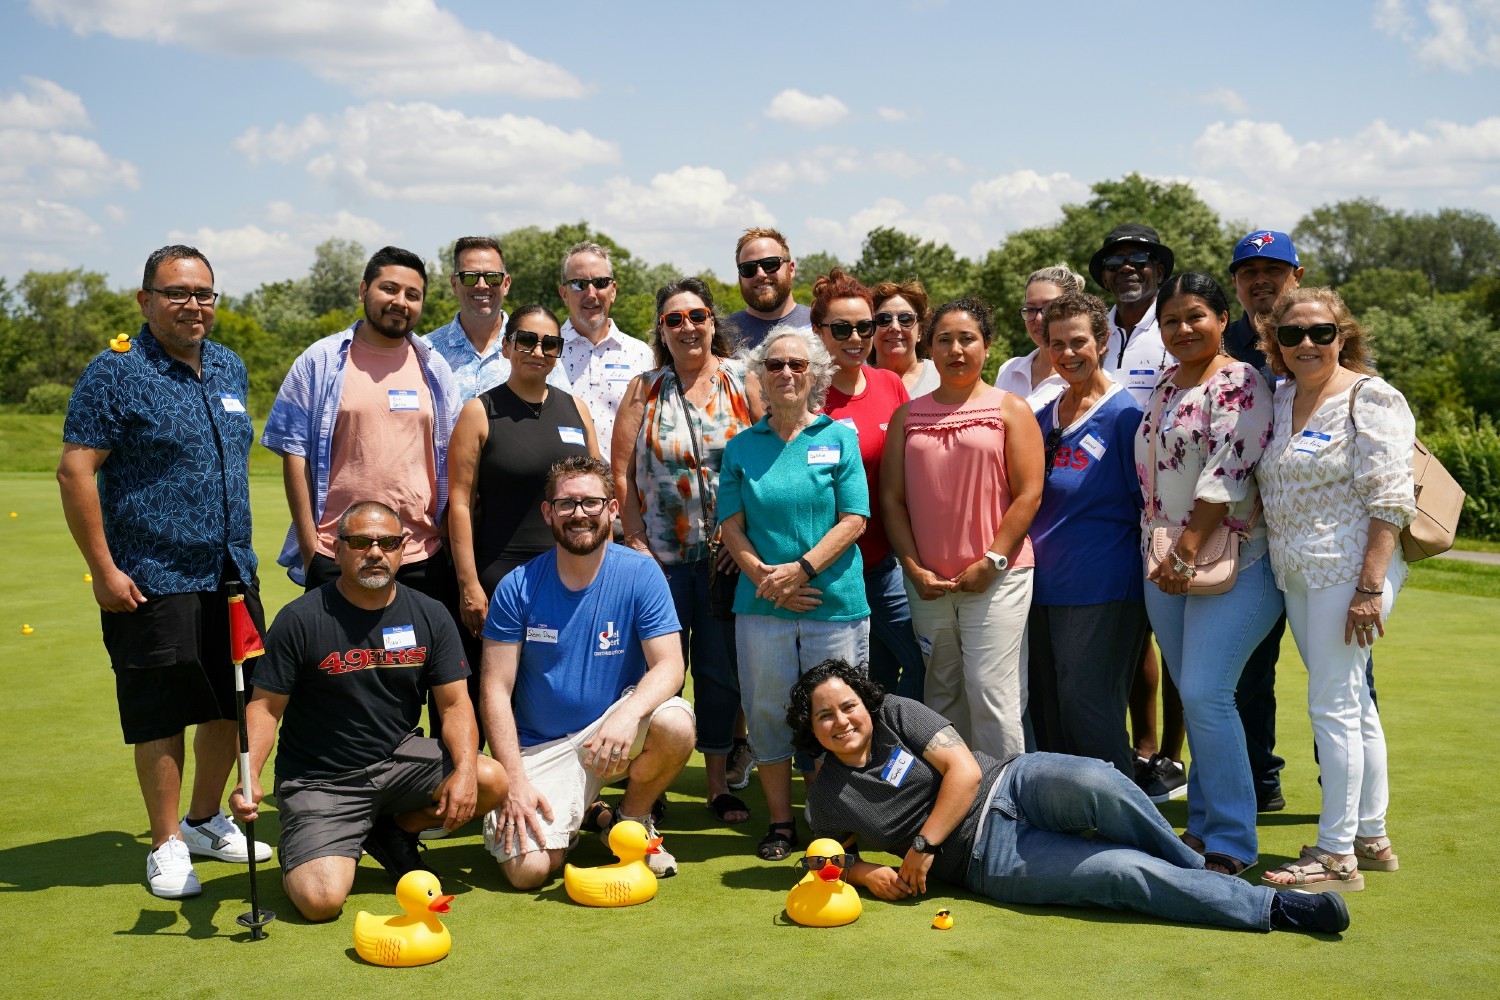 Employees gathered for a great photo op at our annual company picnic!